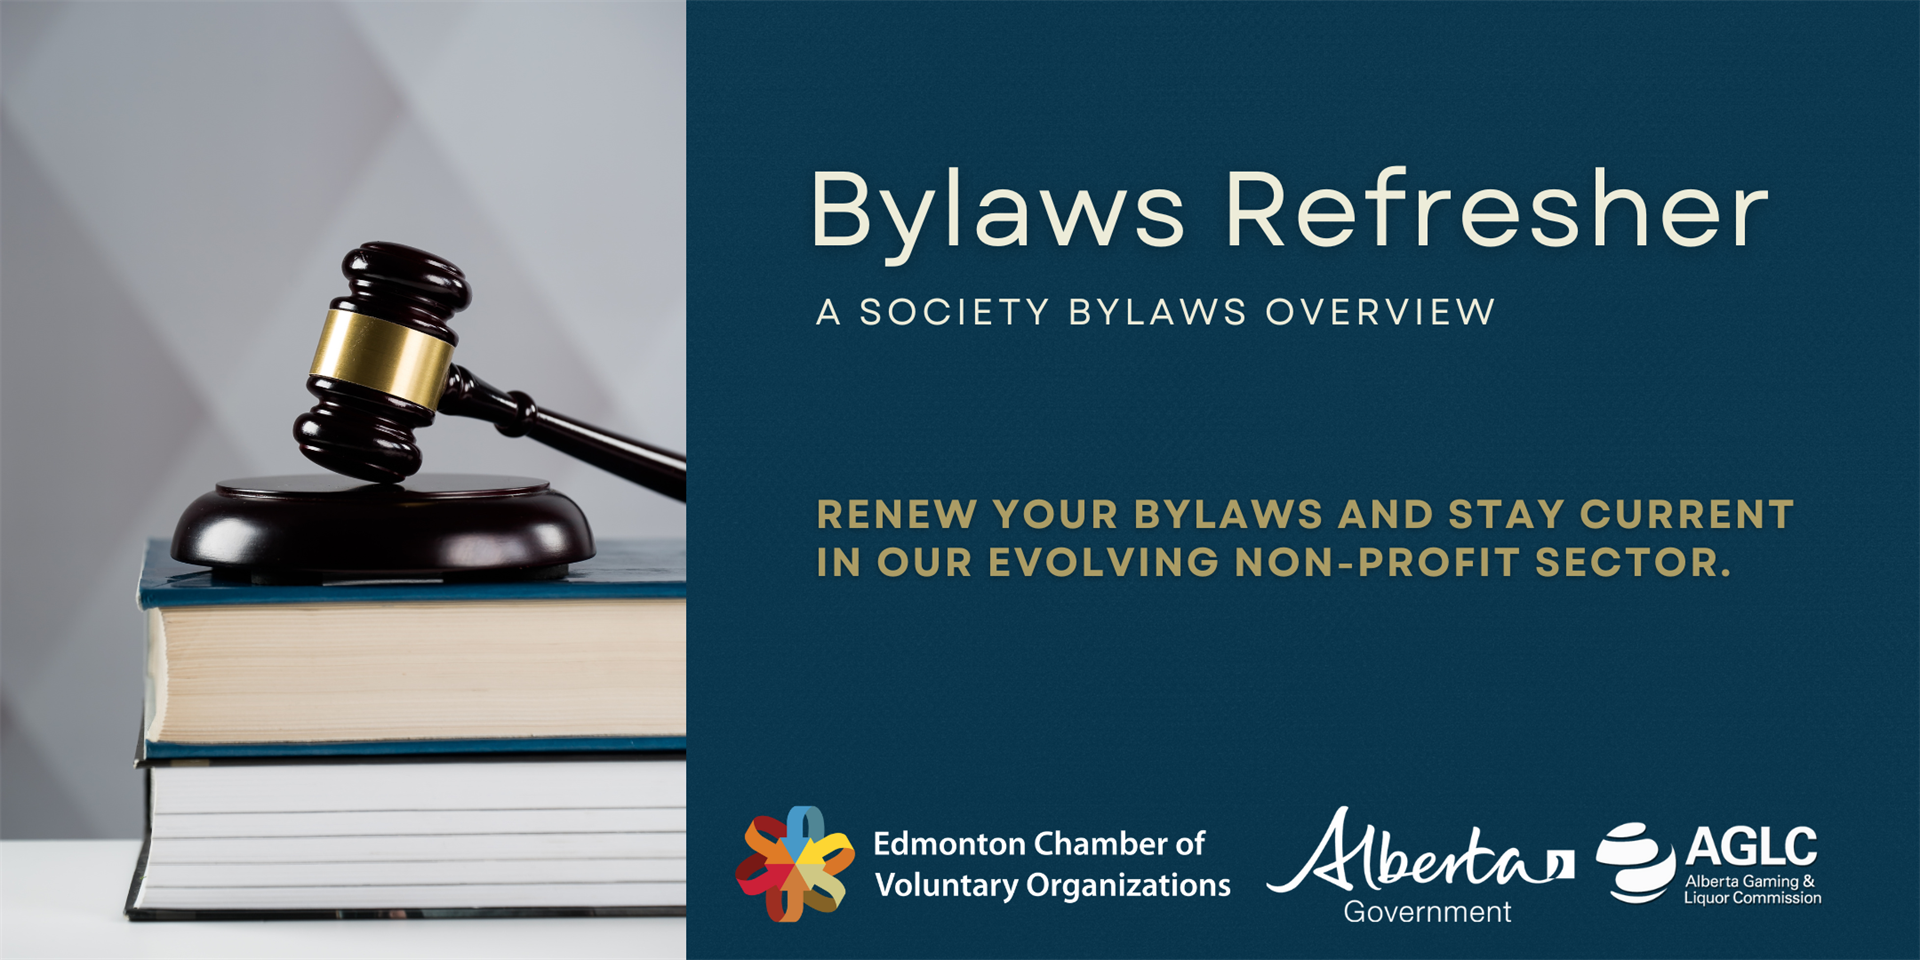 Bylaws-Refresher-A-Society-Bylaws-Overview-2022